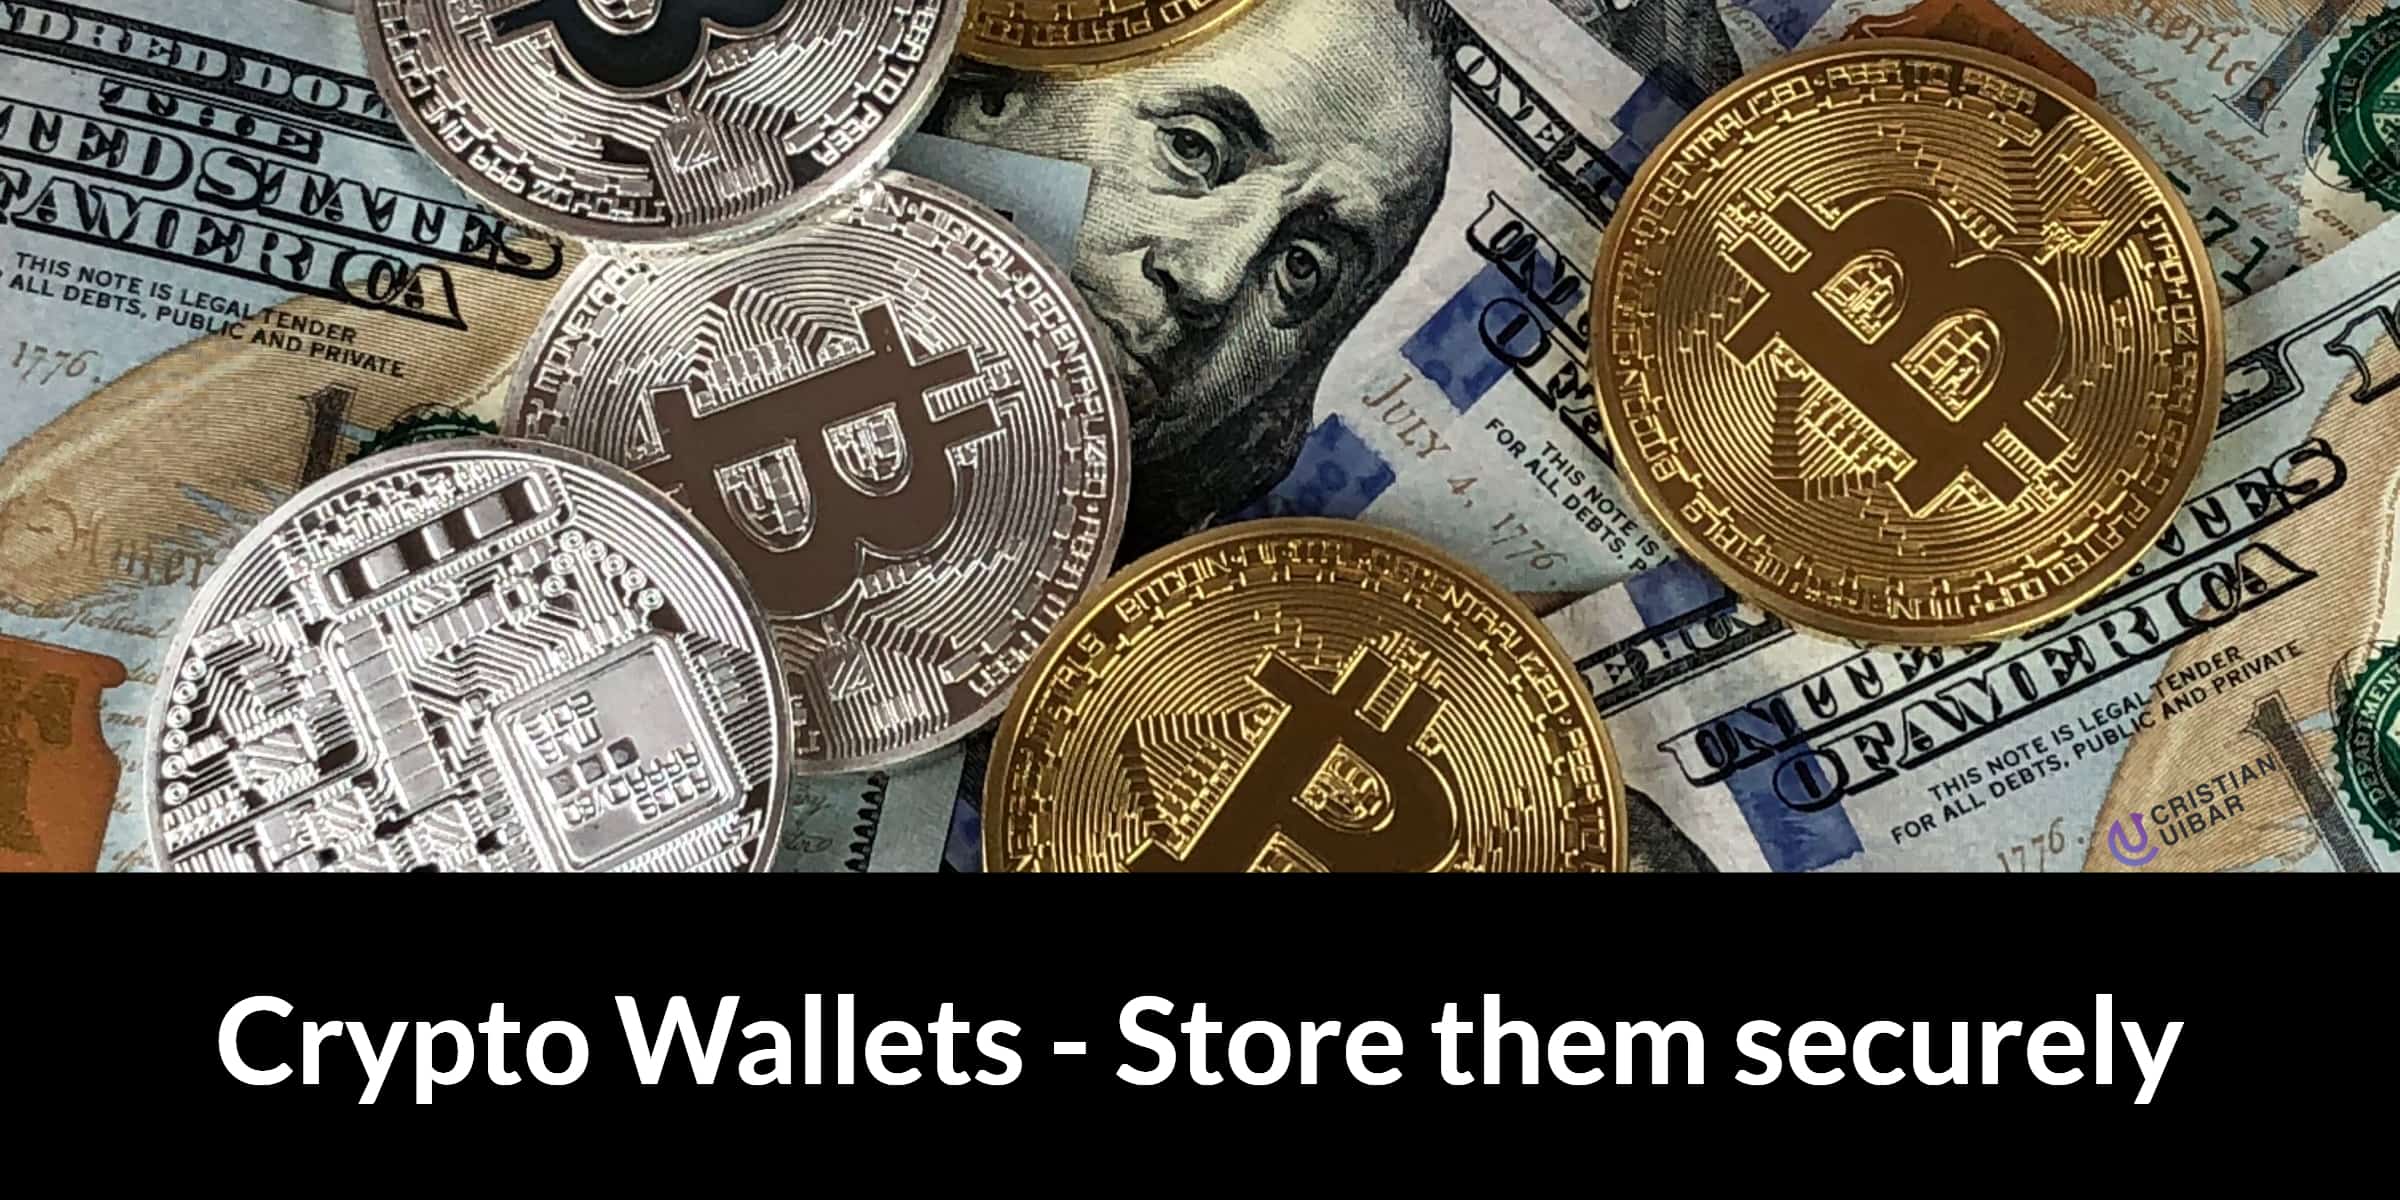 where do you store all of your crypto currency